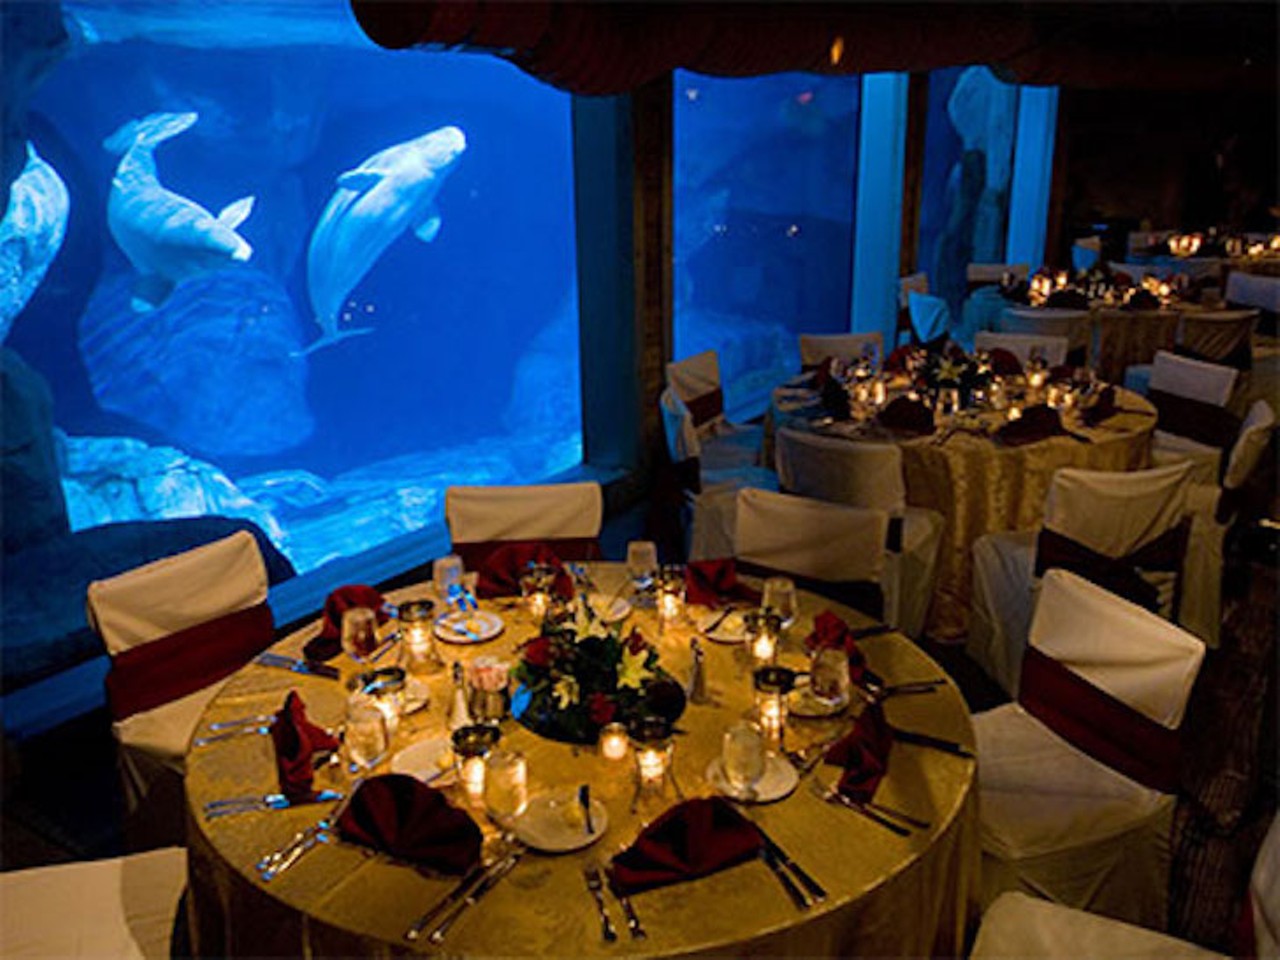 Shark Encounter at SeaWorld
Not many people can say a shark congratulated them at their wedding, but since you live in Orlando-- brag away. The Mr. and Mrs. might not have time for this, but your guests will certainly love that they get quick access to the Manta and Kraken coasters during your event.
7007 Sea World Drive | 888-800-5447
Photo via seaworldparks.com